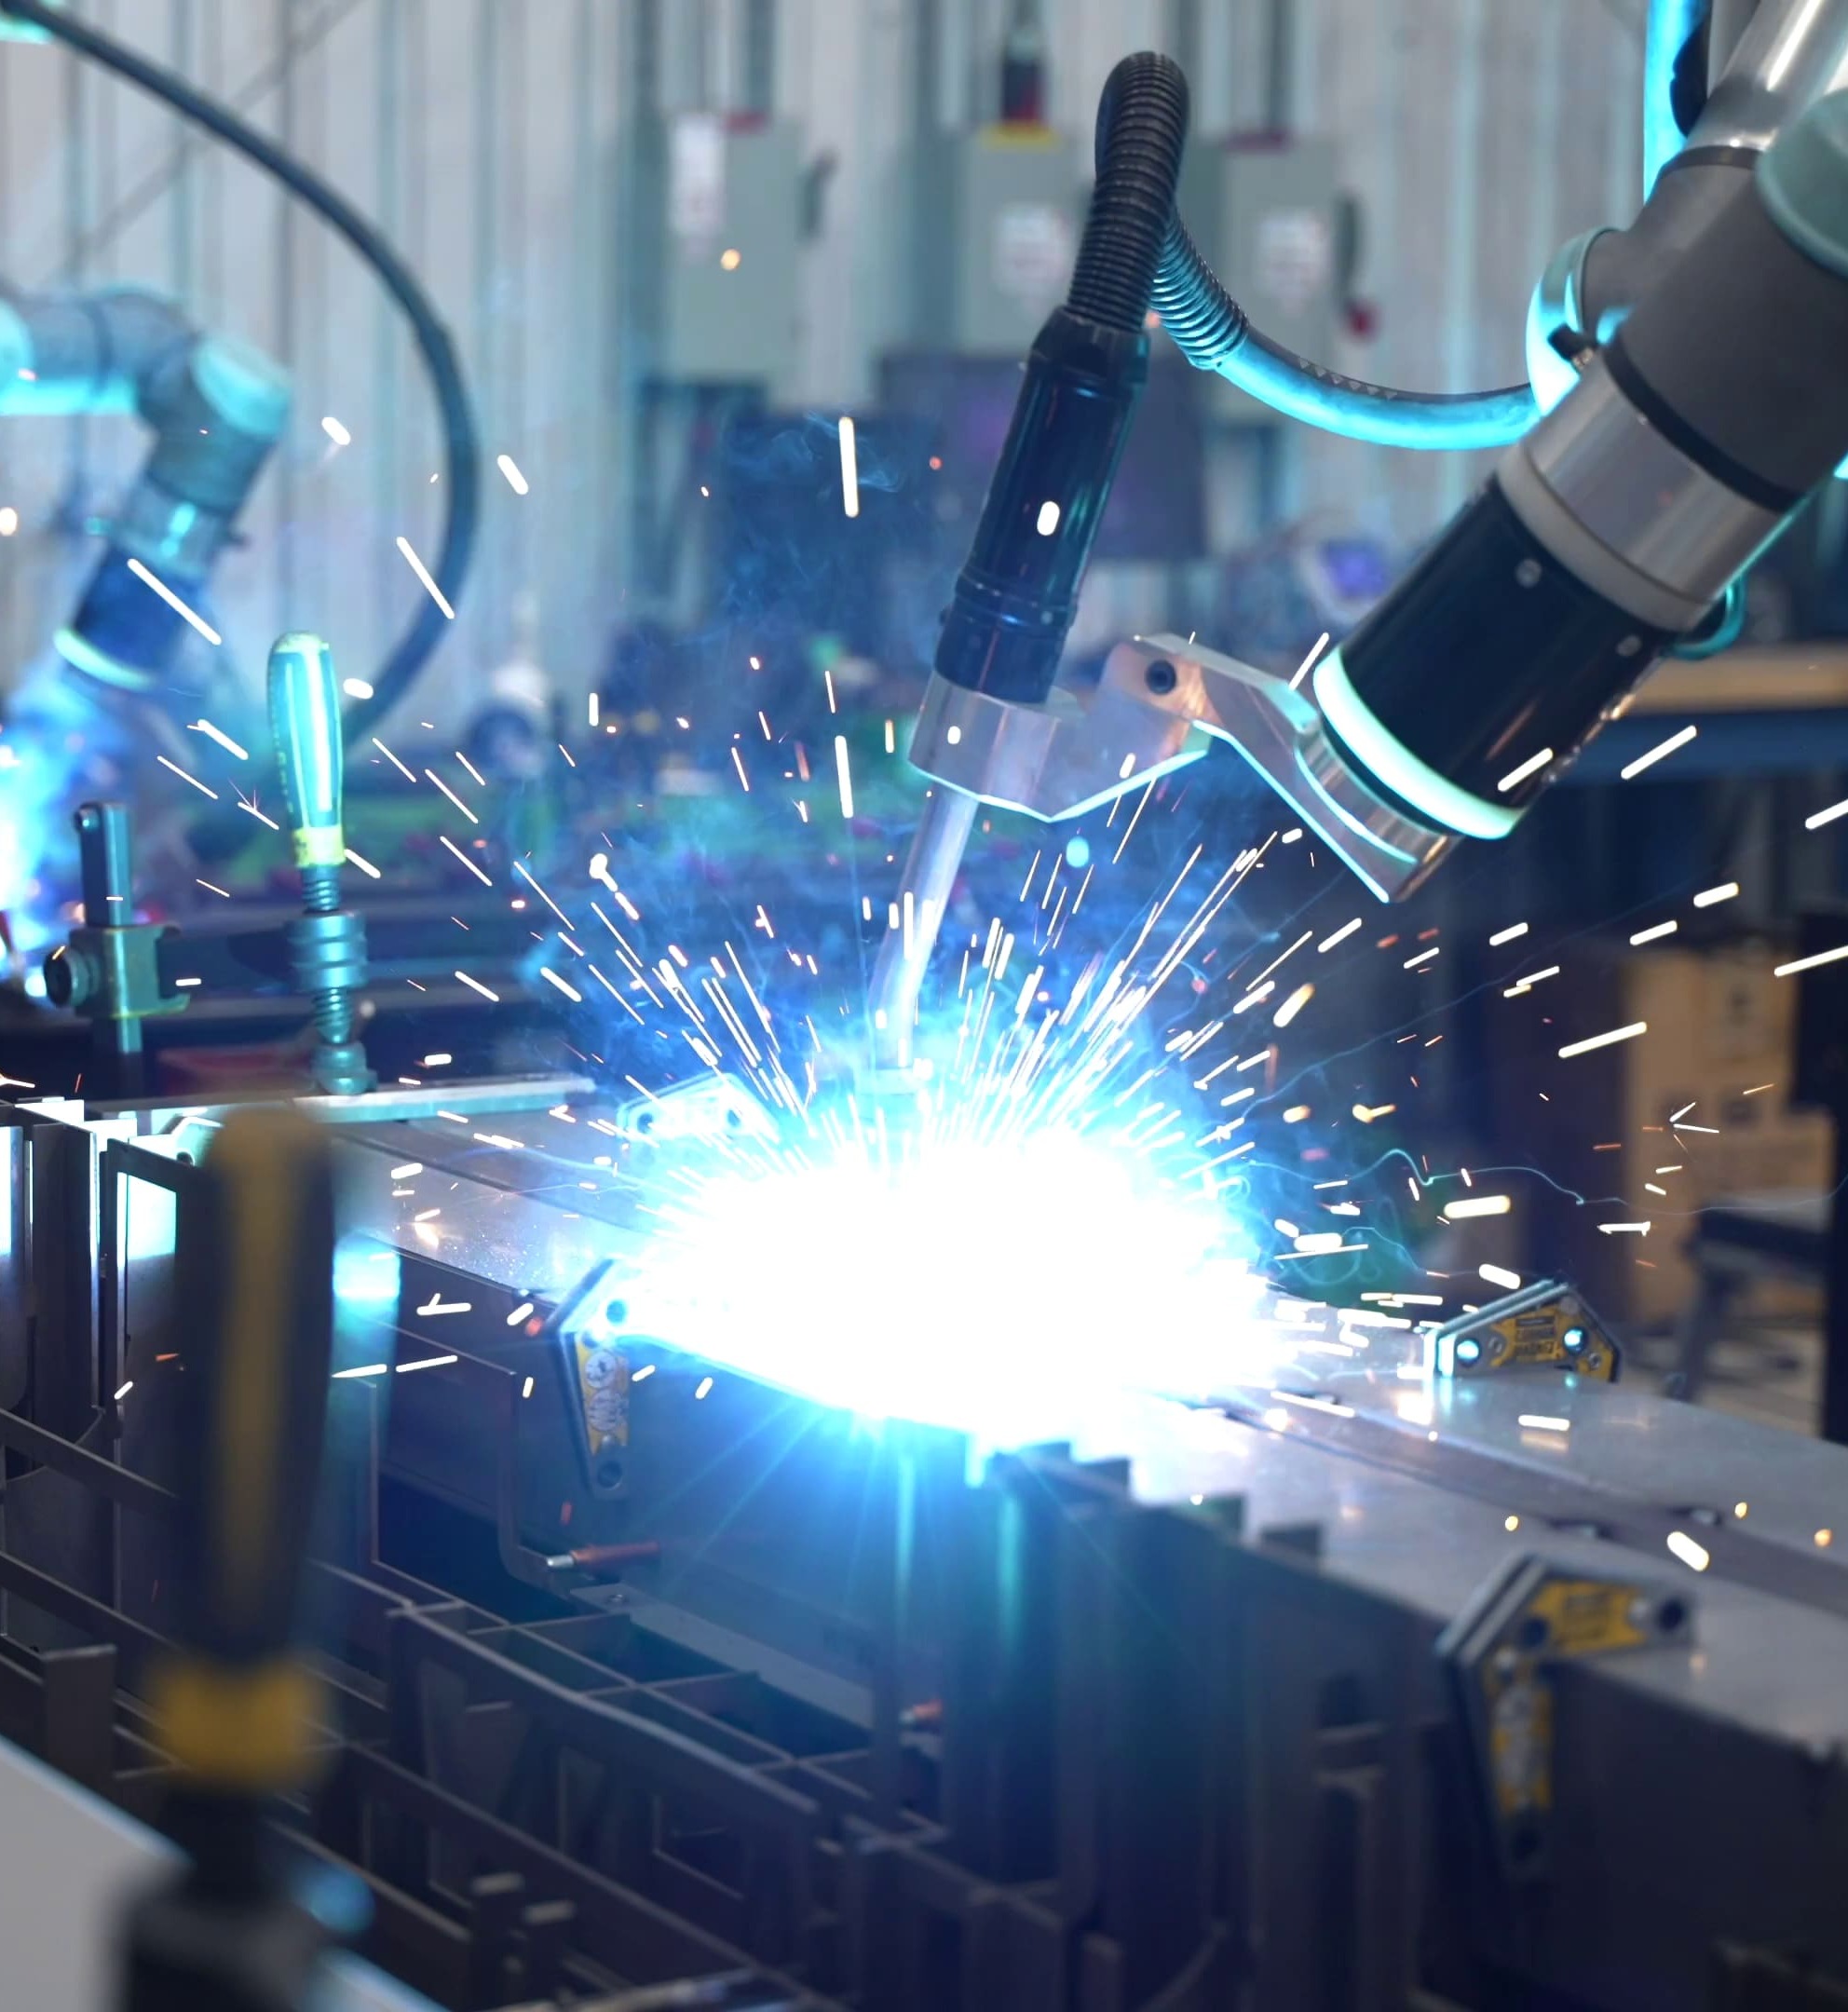 Athena-manufacturing-welding-cobots-in-action